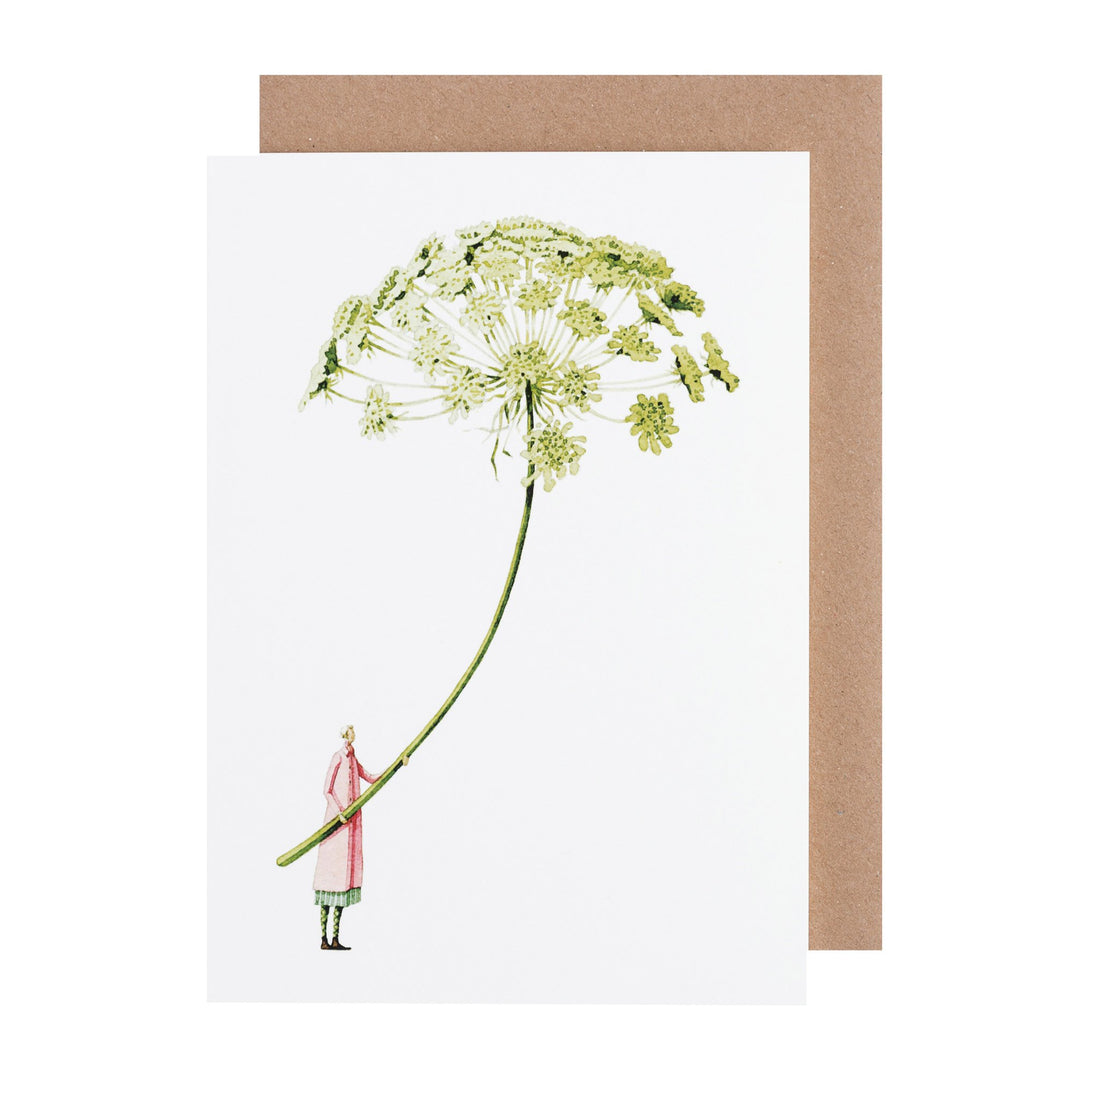 A Hester &amp; Cook Ammi greeting card with an illustration of a woman holding a flower, made from environmentally sustainable materials.